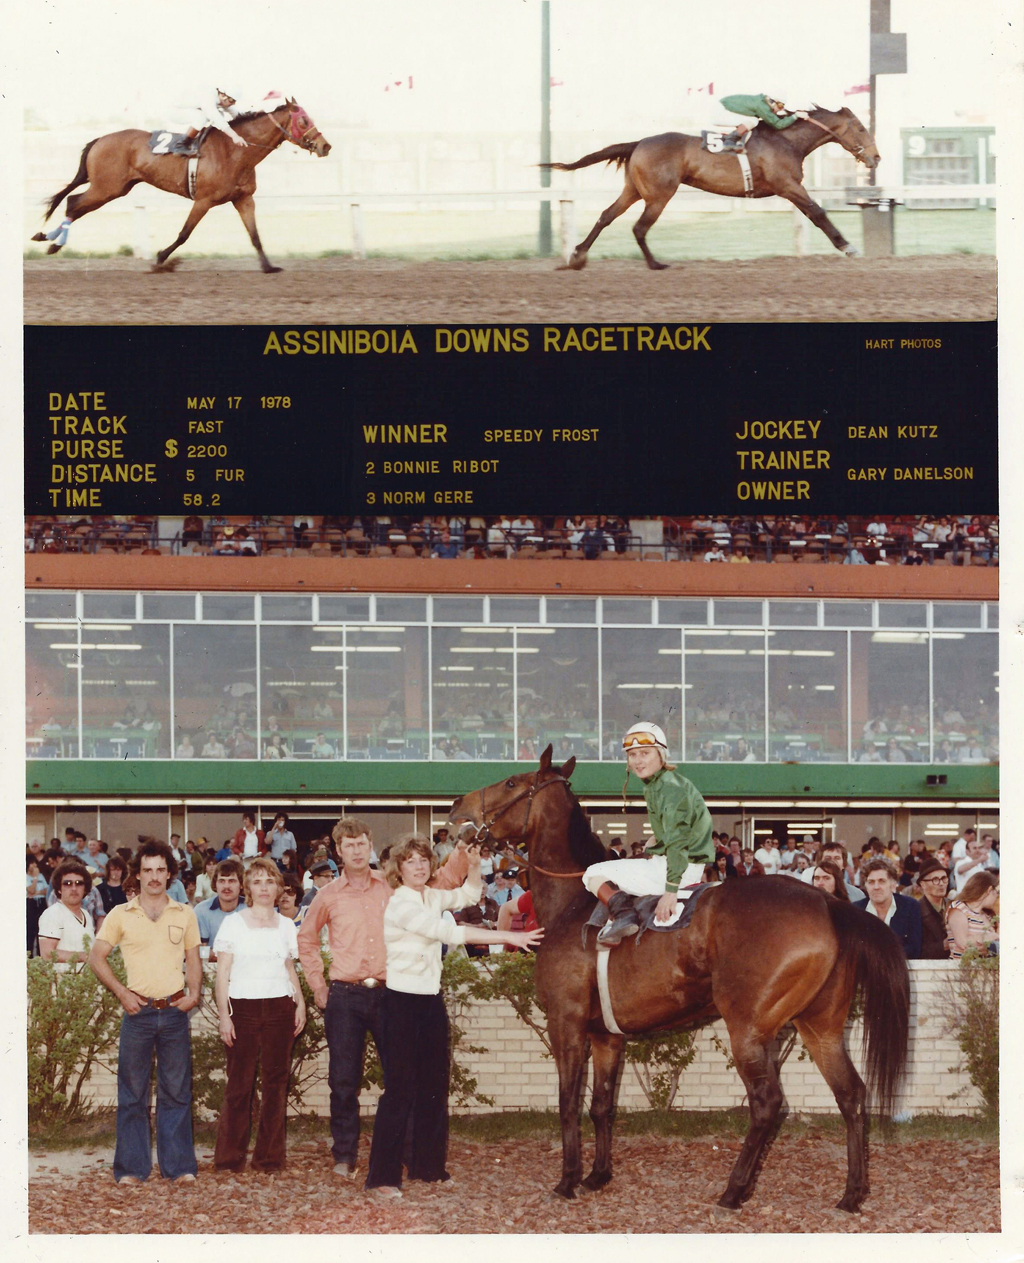 Speedy Frost, Job's Alibi and wonder filly Liz's Pride each won eight at Assiniboia Downs in 1978.